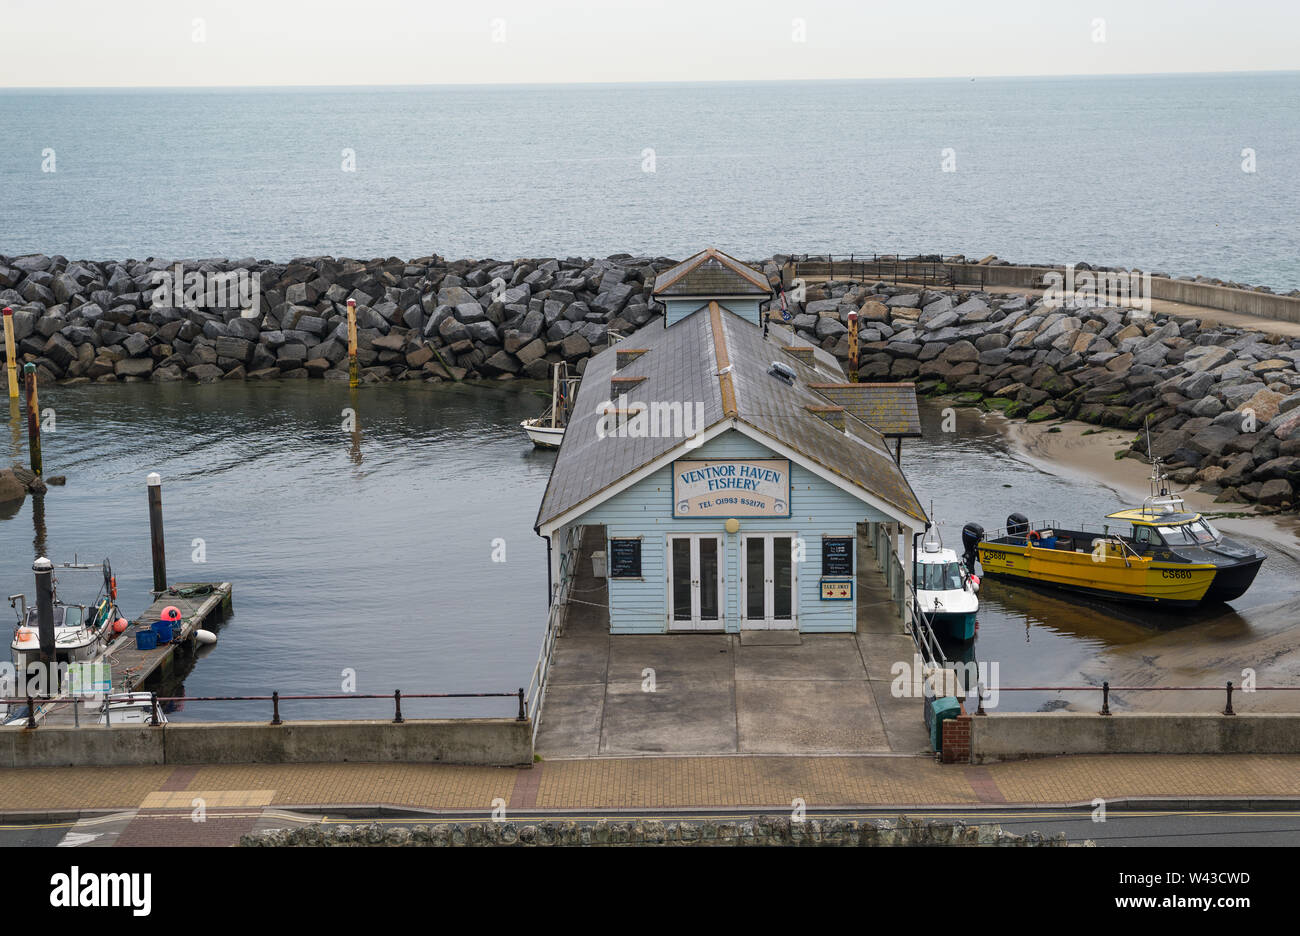 Ventnor Haven Fishery seafood restaurant and wholesaler, situated in a tiny harbour on seafront in Ventnor, Isle of Wight, England, UK Stock Photo